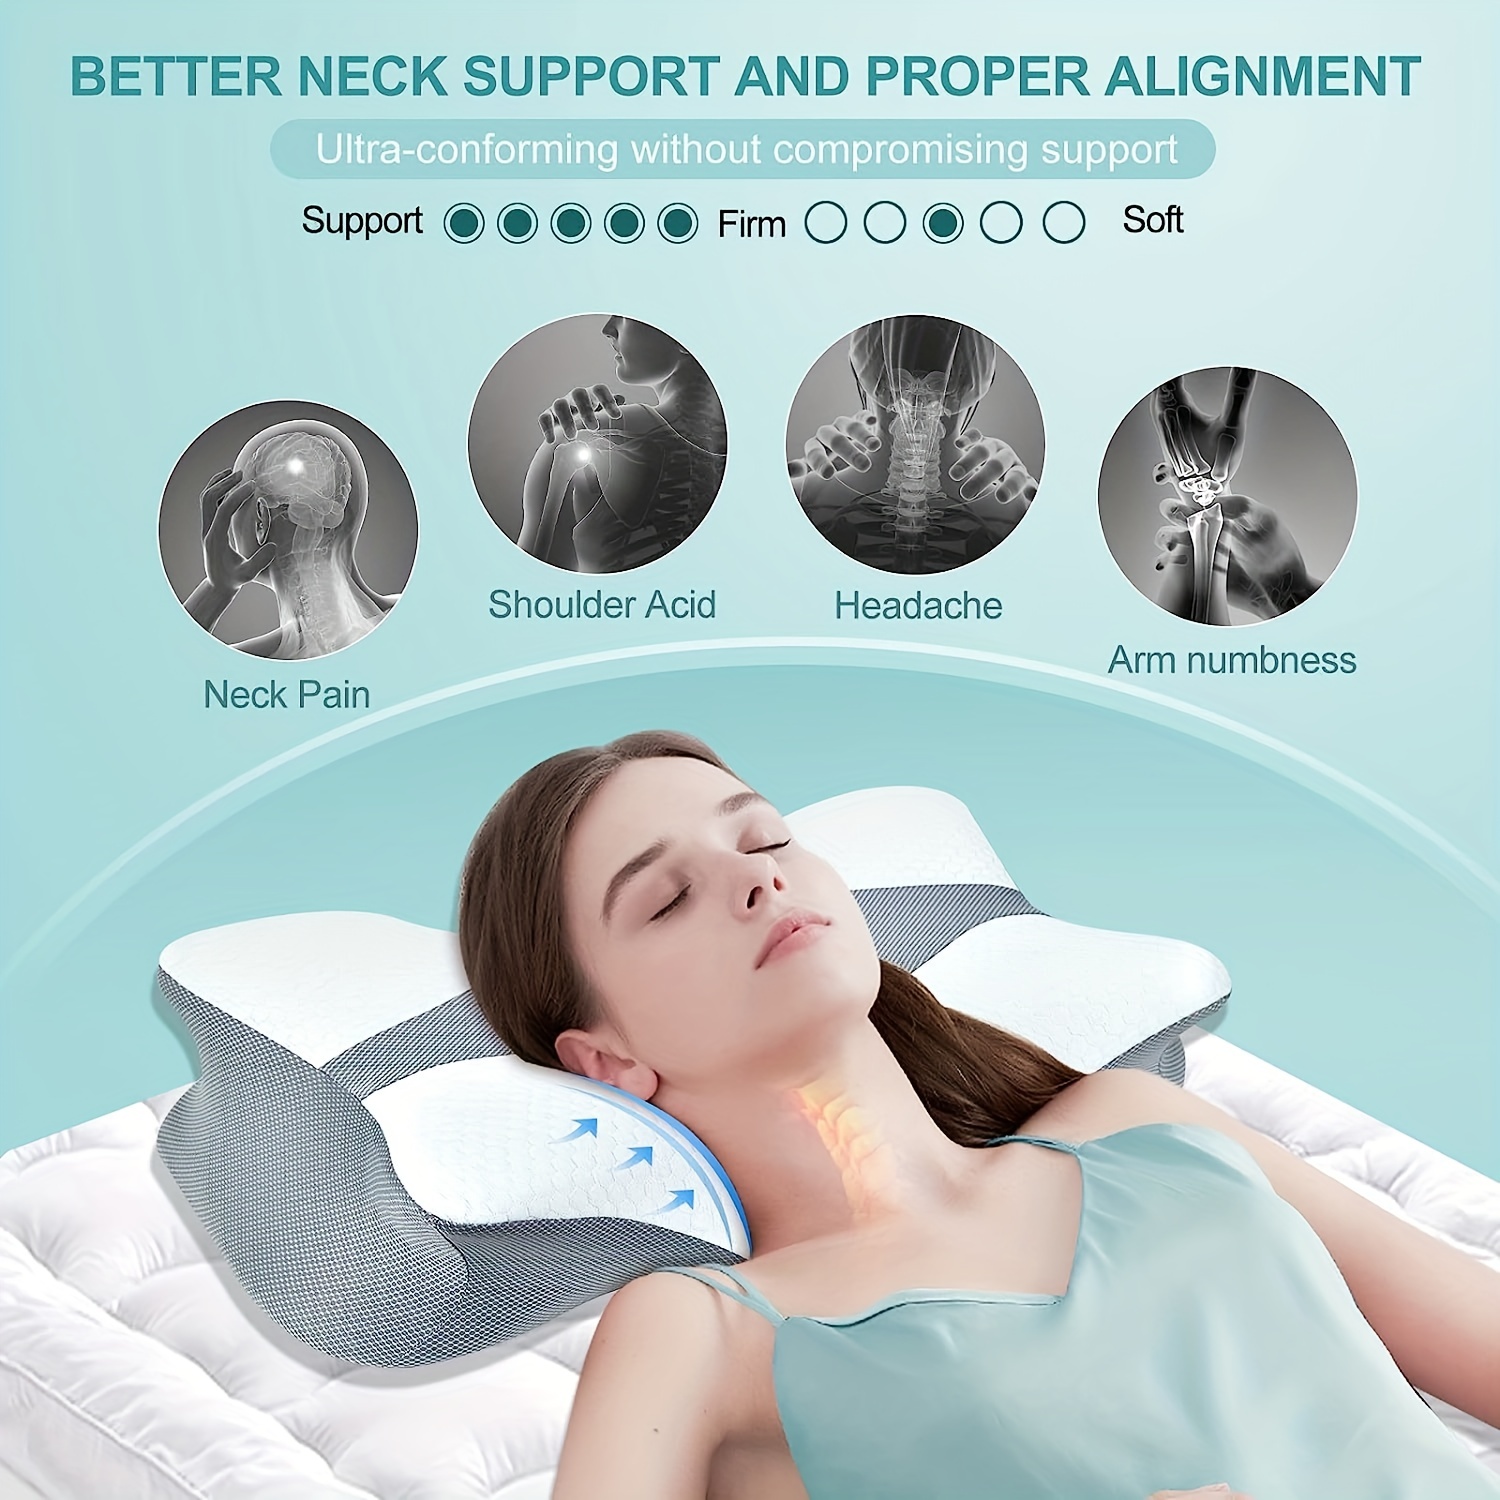 Say Goodbye To Neck Pain With The Best Pillows For Side Sleepers